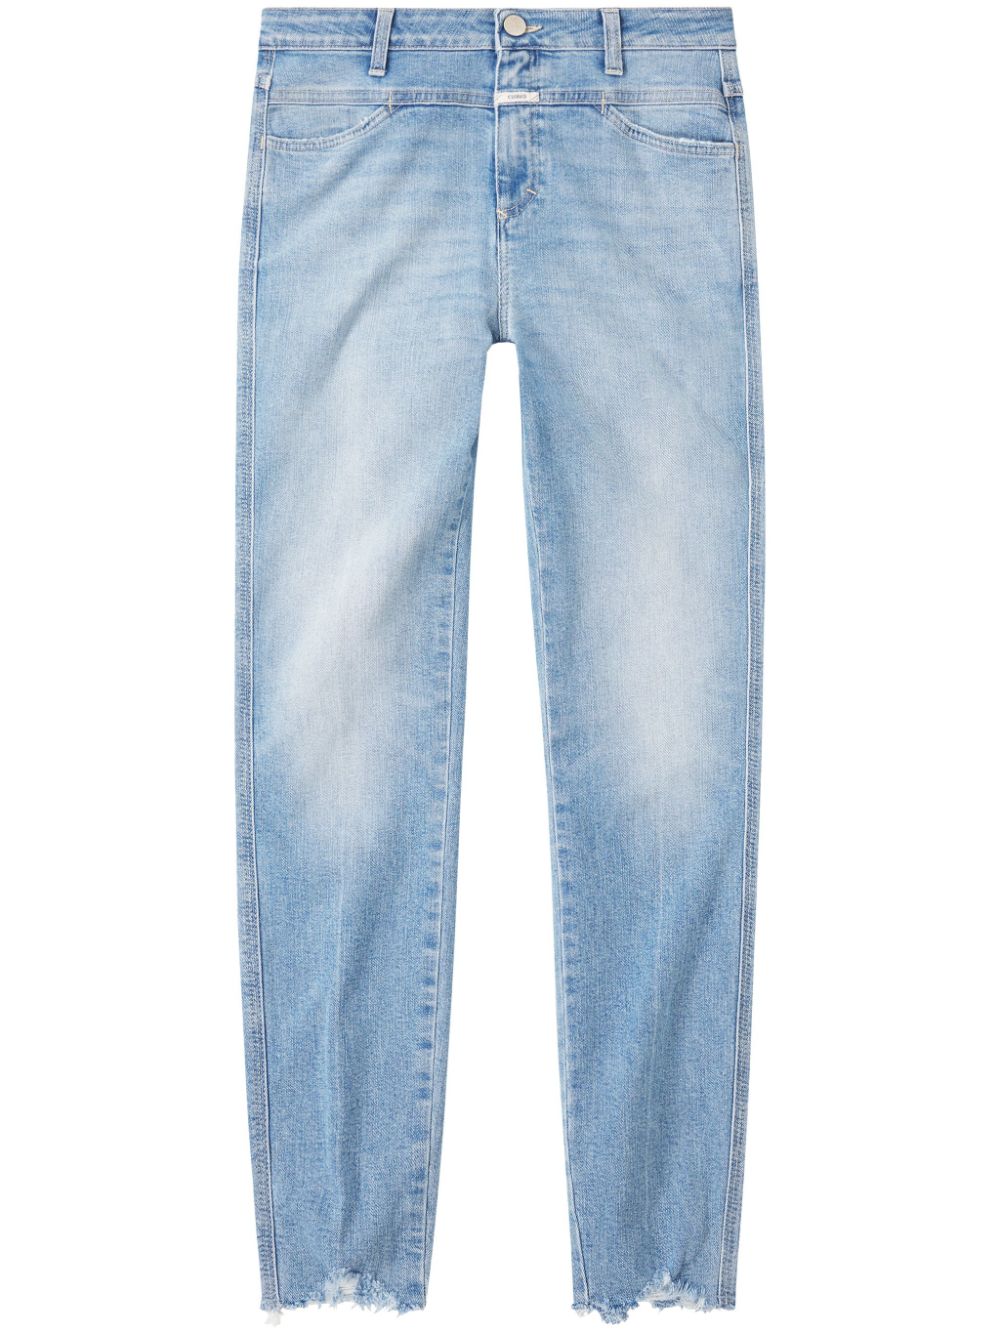 Pusher mid-rise skinny jeans